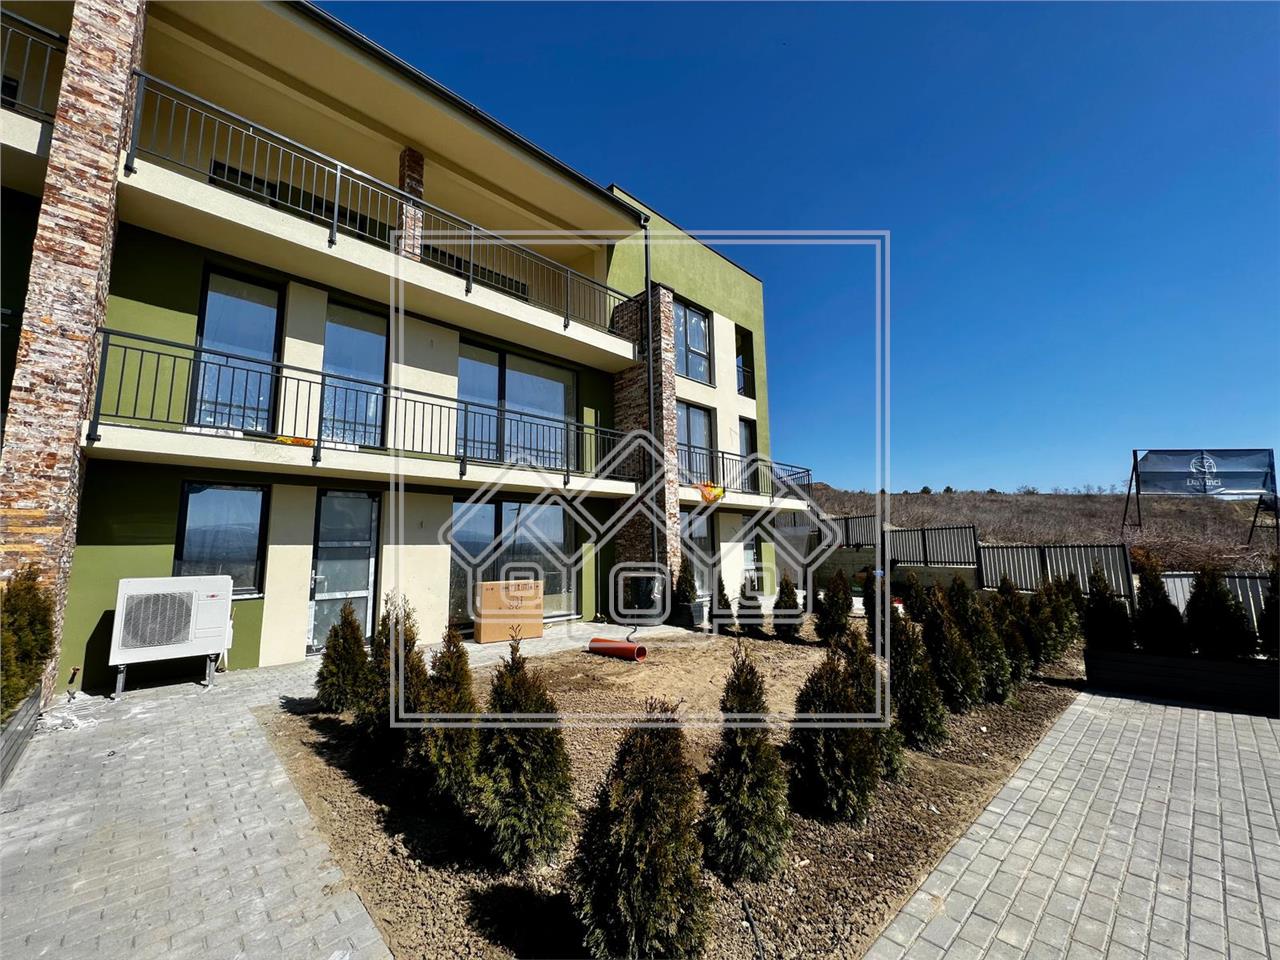 House for sale in Sibiu - 289 sqm land and 16 sqm balcony